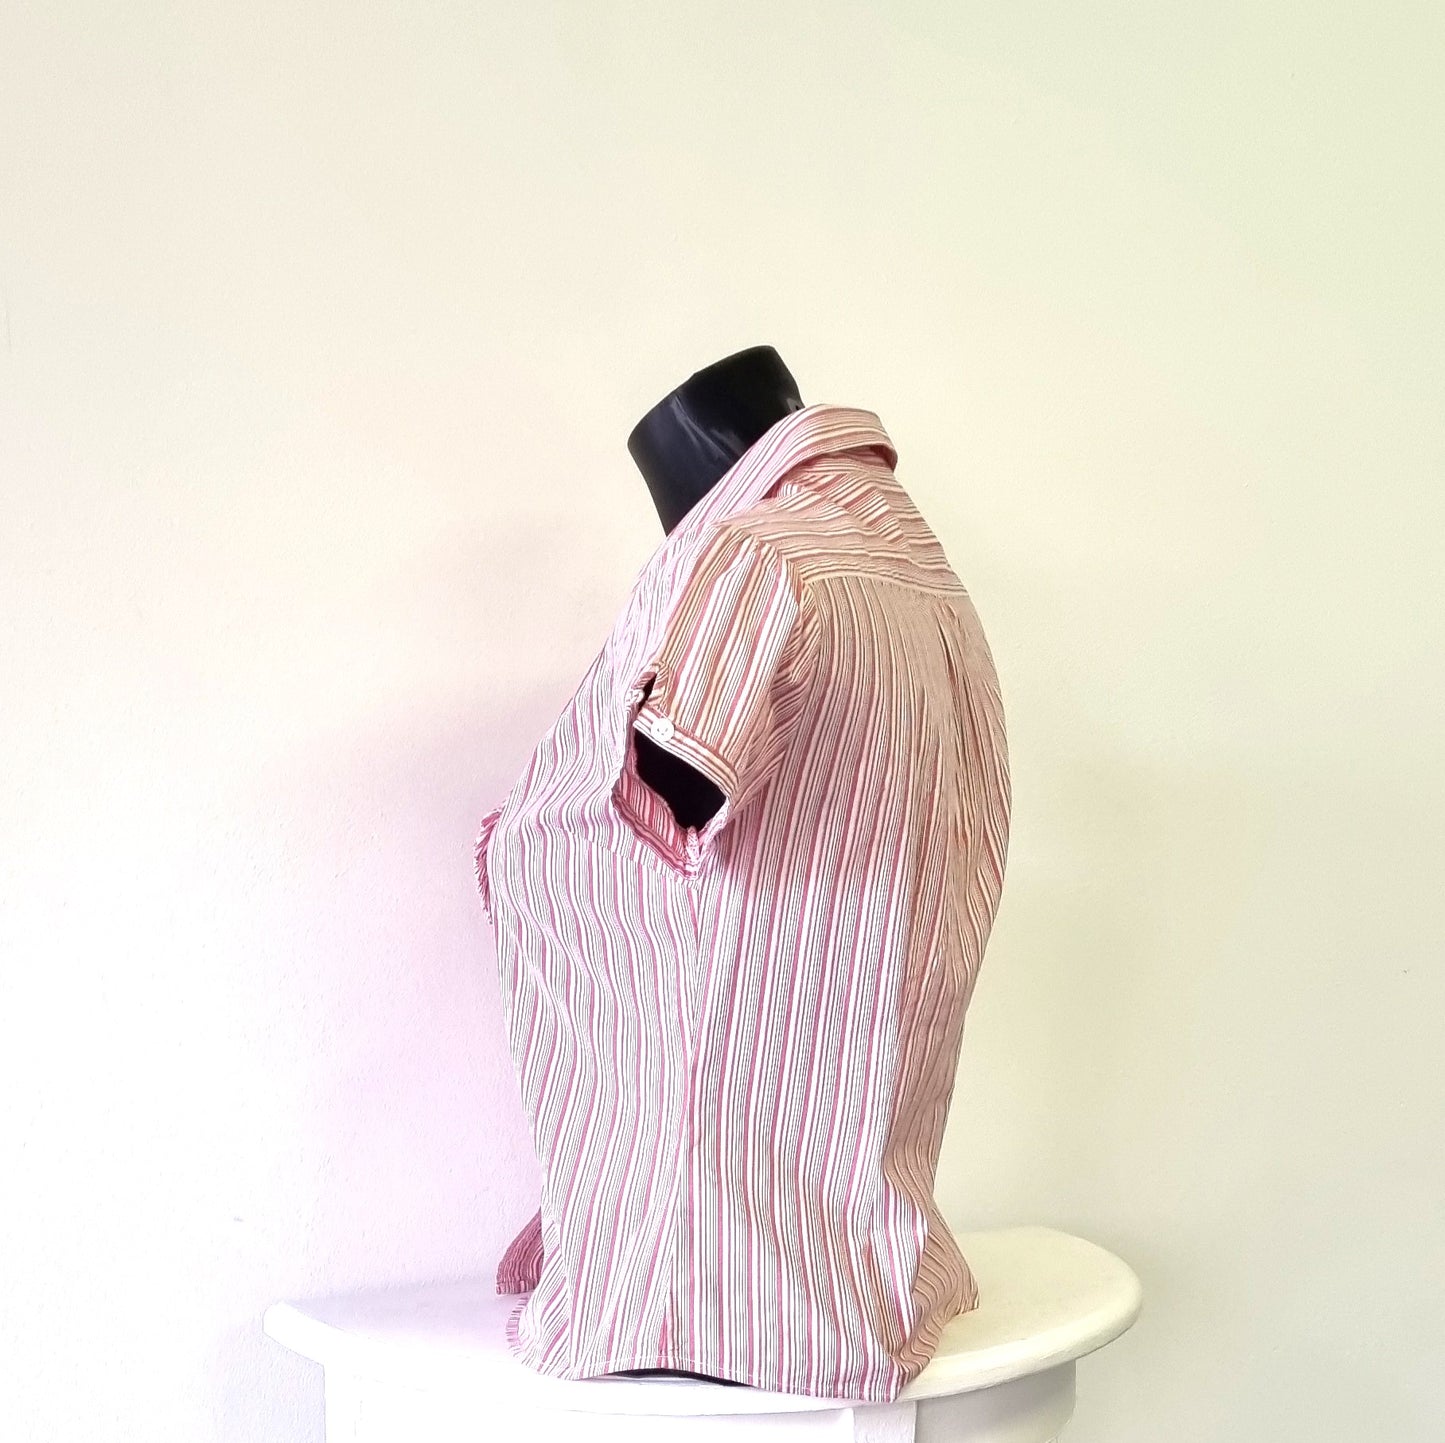 Kelso - Vintage Pink Candy striped cotton short sleeve shirt